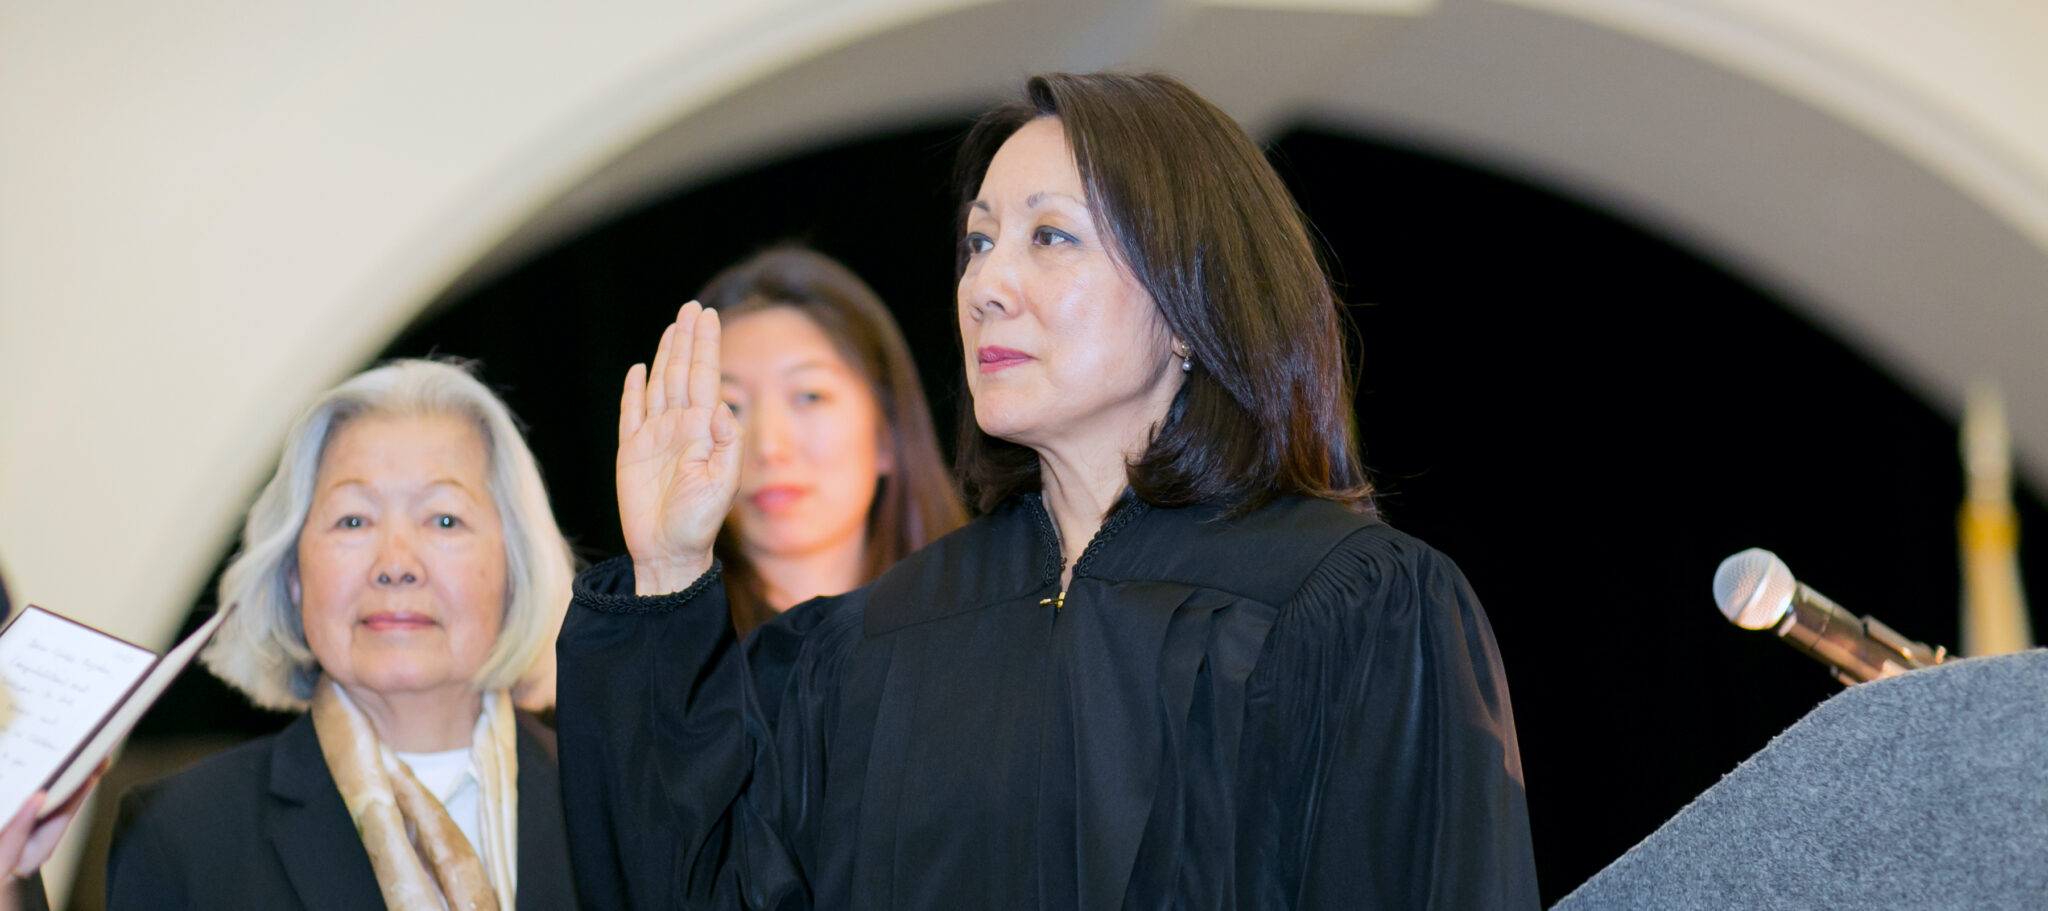 Margaret being sworn in as a judge as her mother and daughter look on